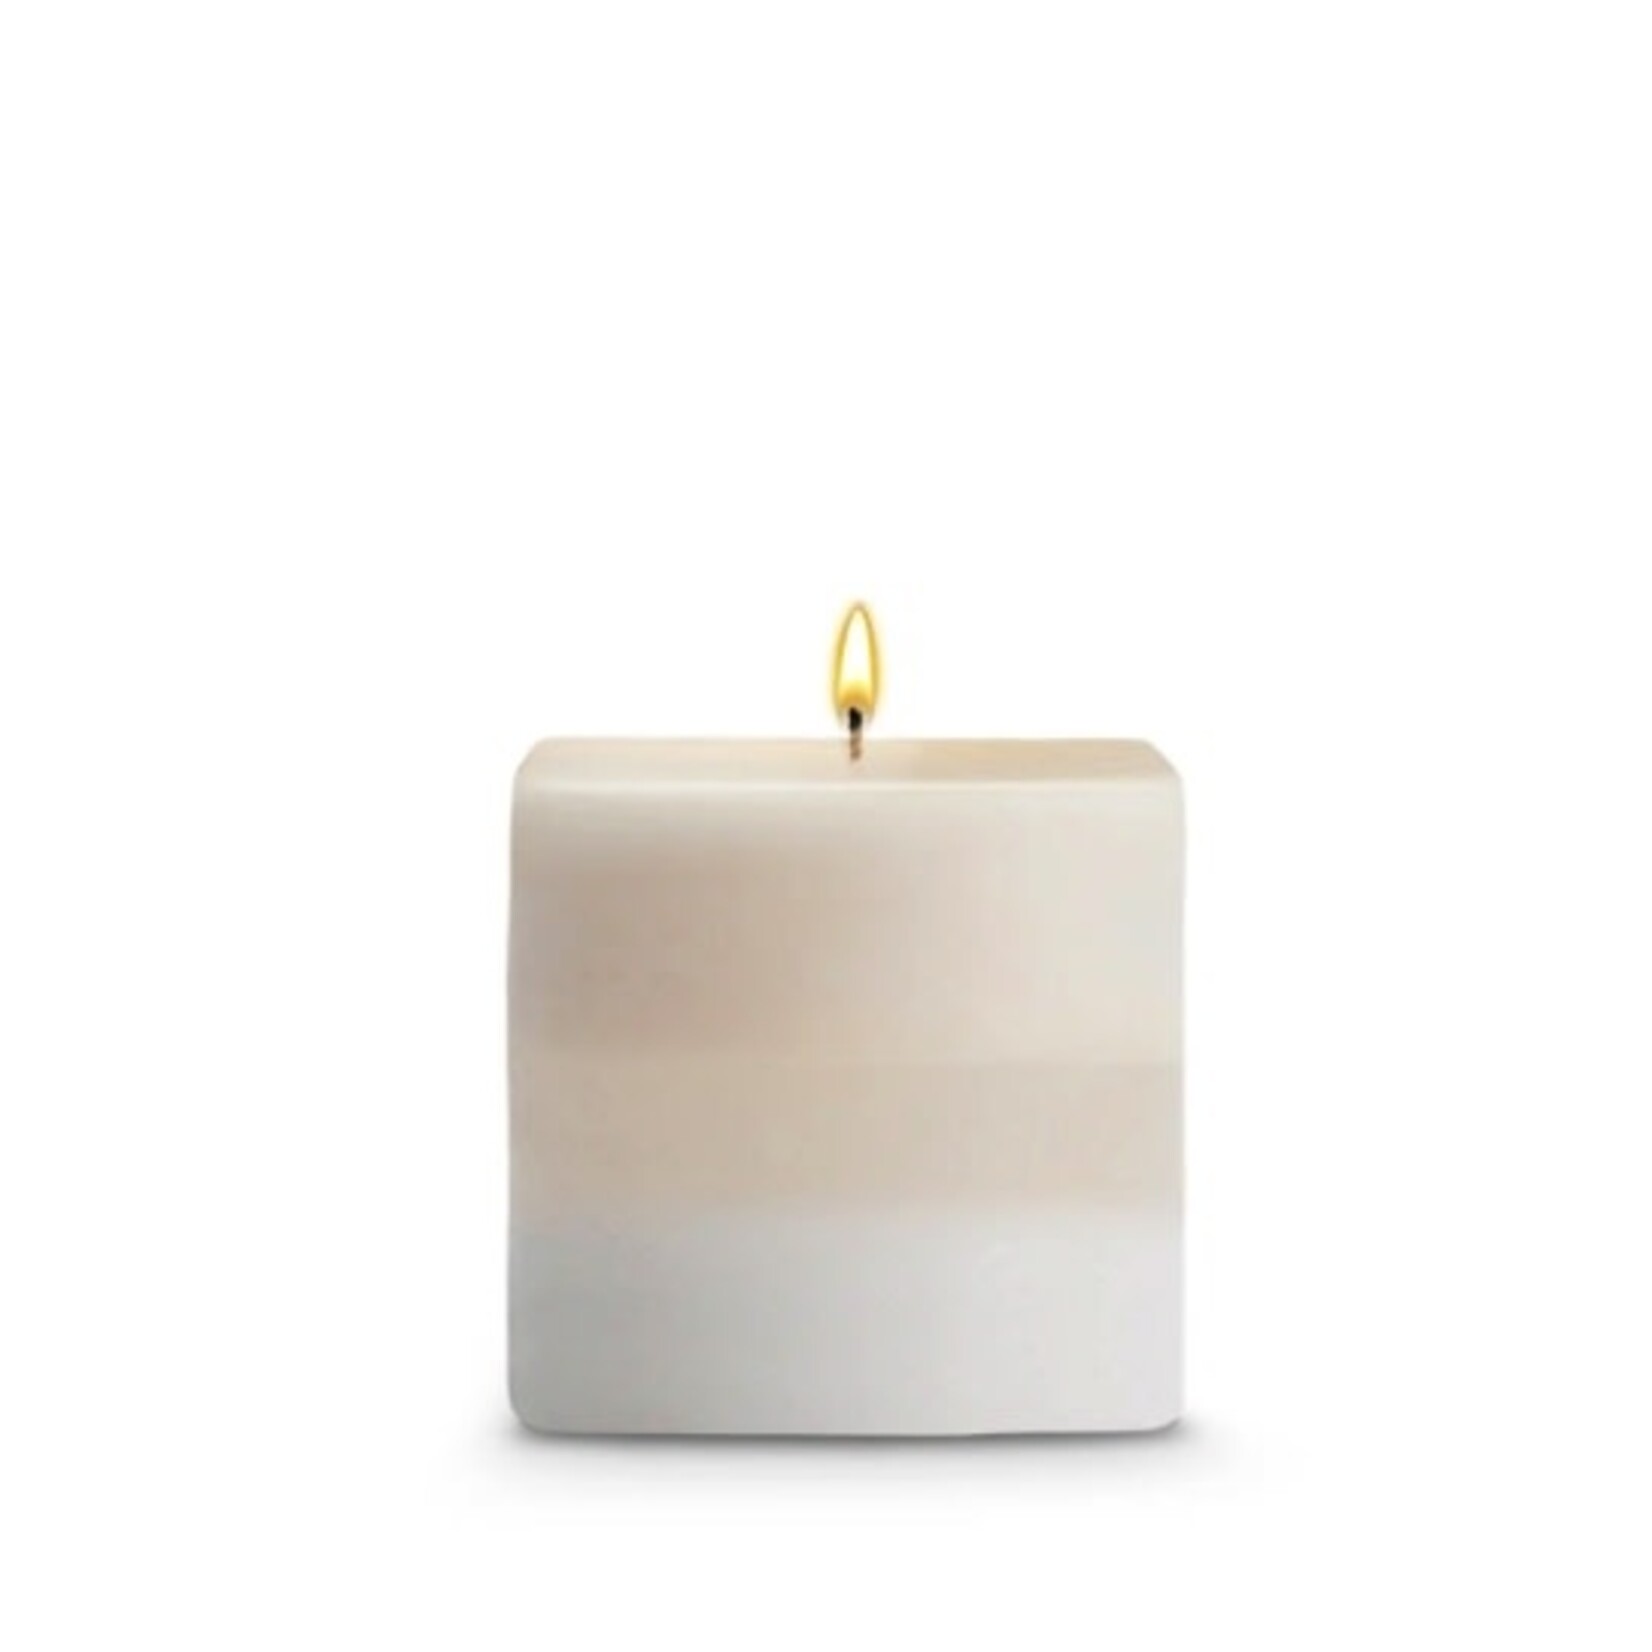 STONE CANDLES STONE PILLAR CANDLE 3X3 AMBER ROSE SQ